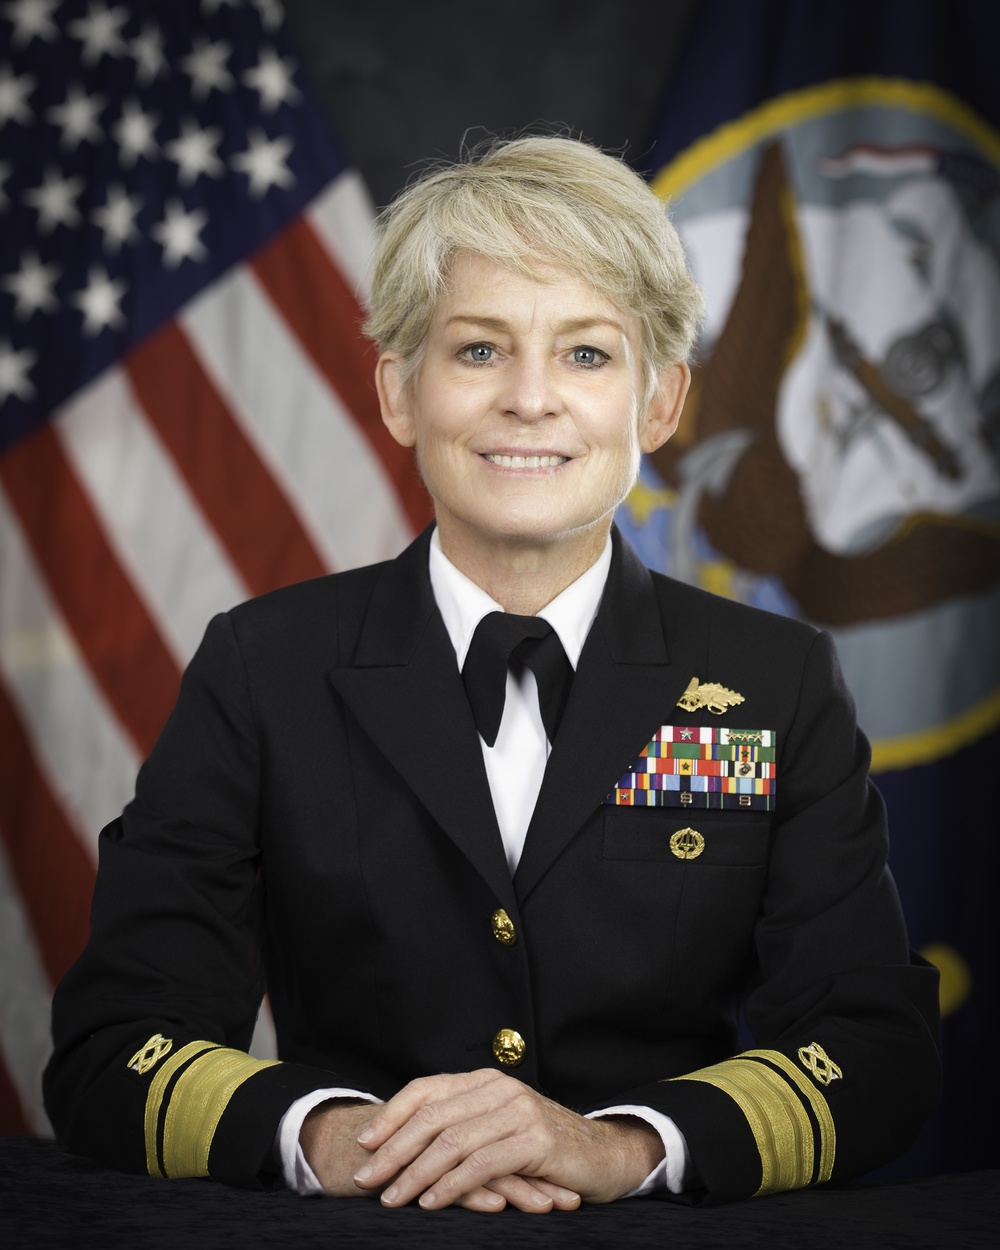 Official portrait of Commander, Naval Facilities Engineering Command and Chief of Civil Engineers Rear Adm. Katherine L. Gregory, US Navy